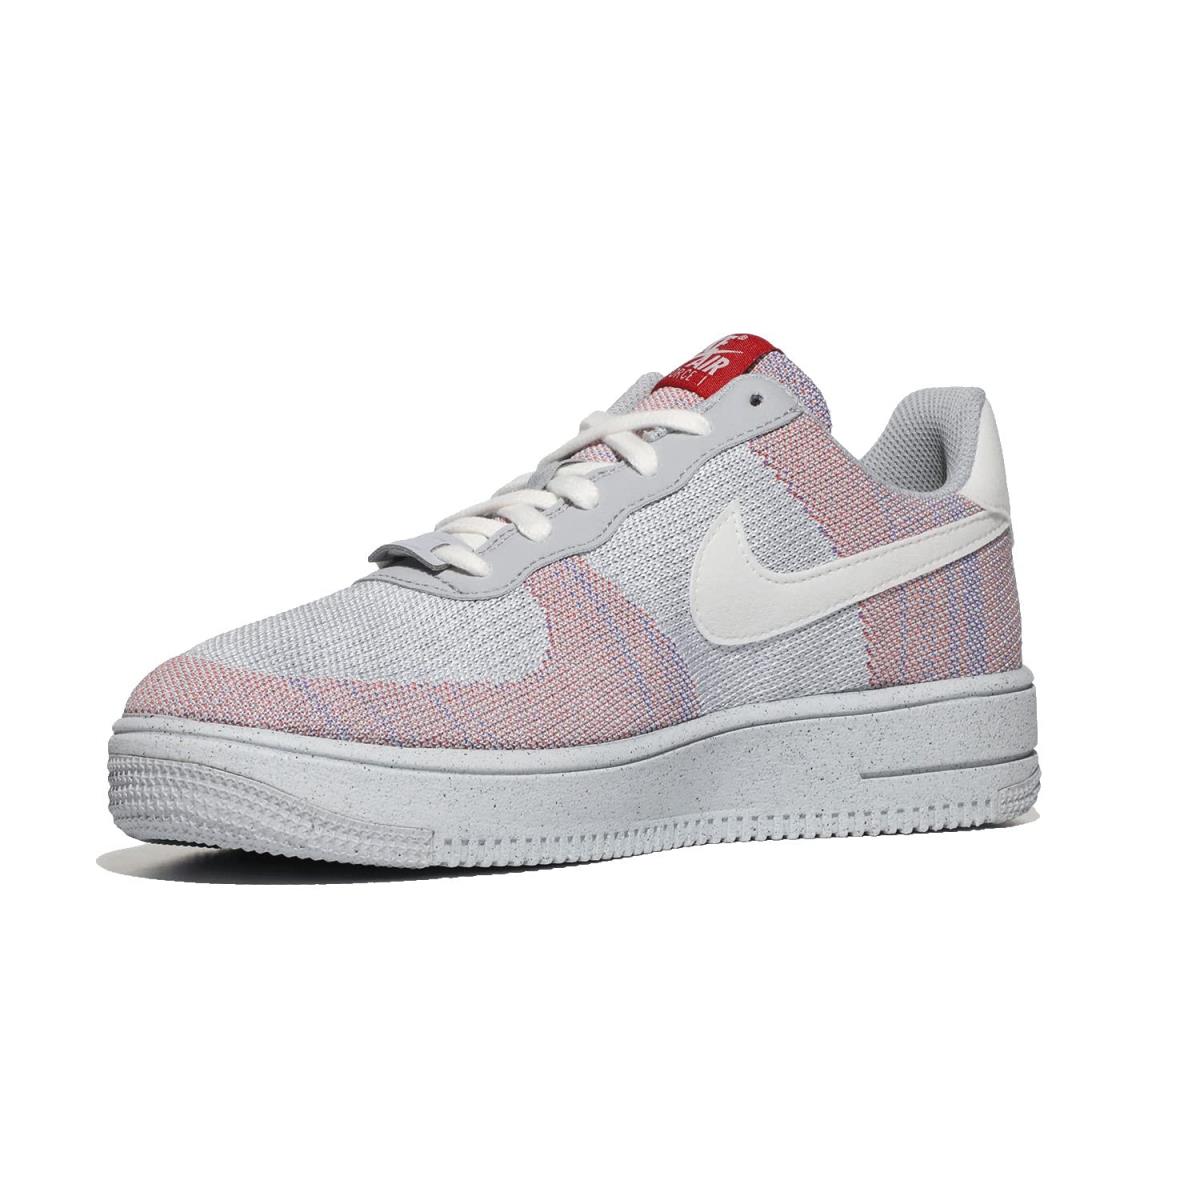 Boy`s Shoes Nike Kids Air Force 1 Crater Flyknit Big Kid Wolf Grey/White/Pure Platinum/Gym Red